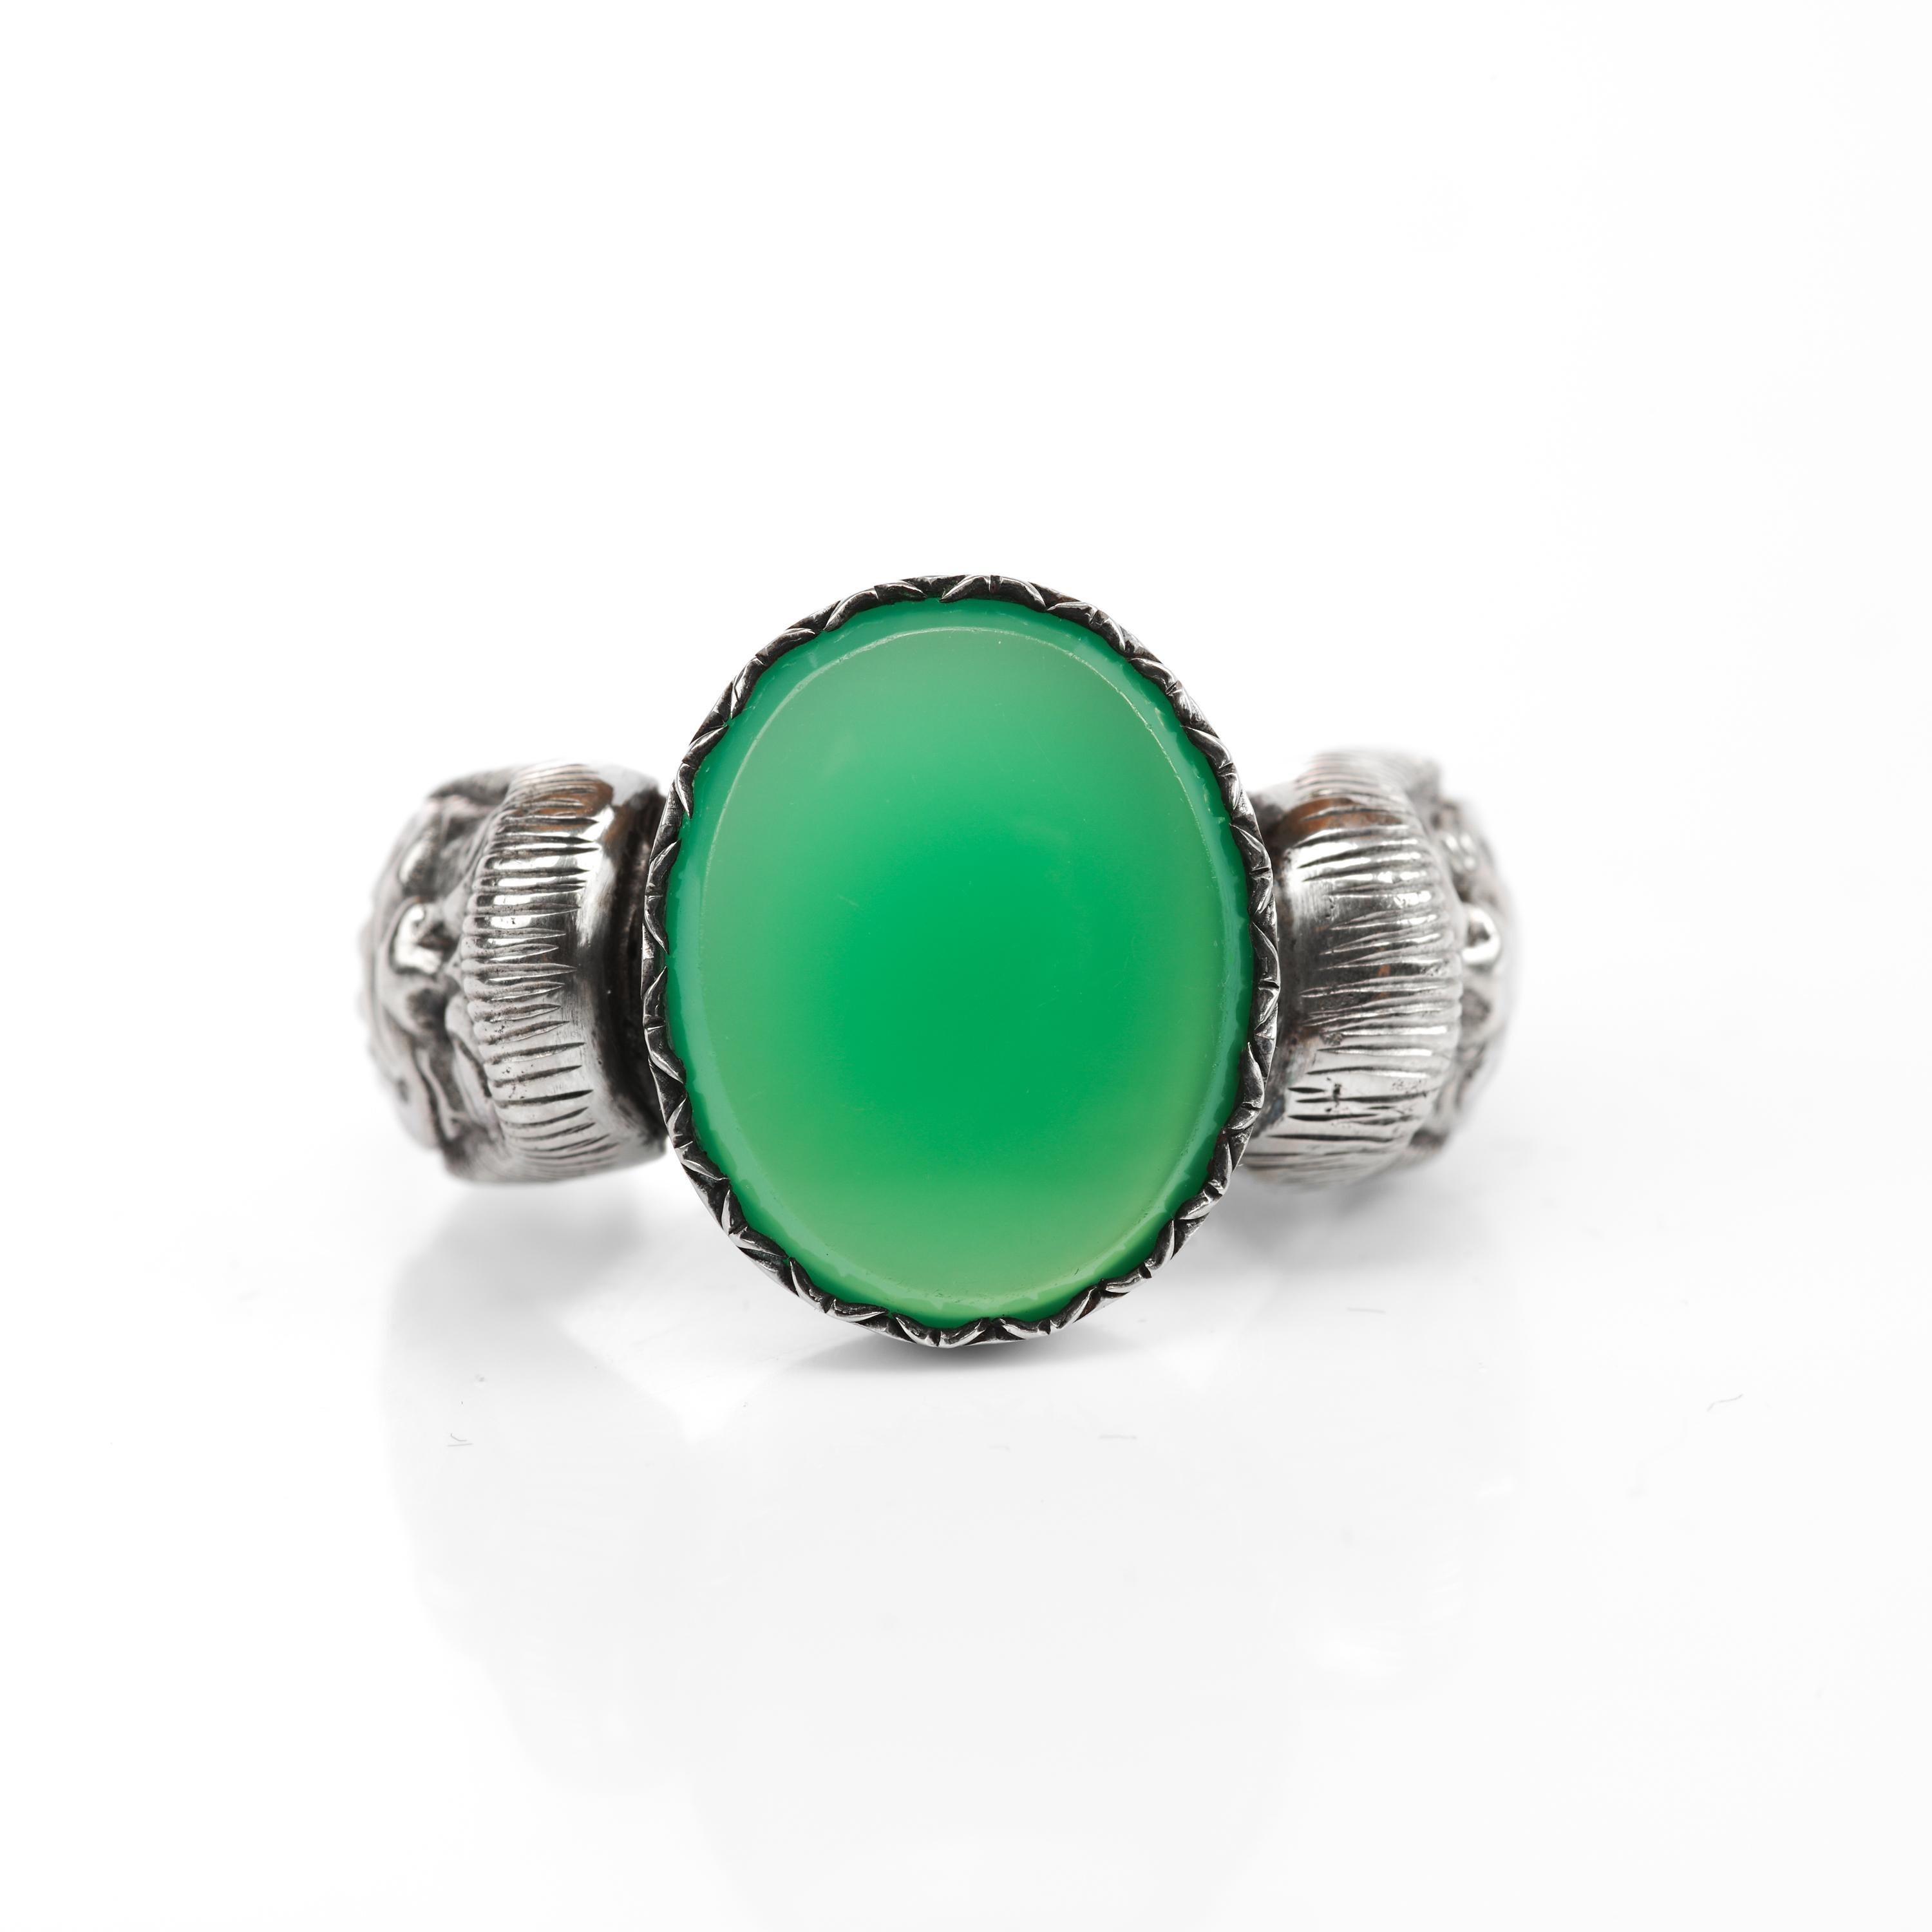 With what I believe to be a figural satyr on each shoulder, this blazingly unusual silver and green chalcedony ring is fronted with a lush buff-top and beveled-edged chalcedony gemstone. I have only seen one other ring even remotely similar to this